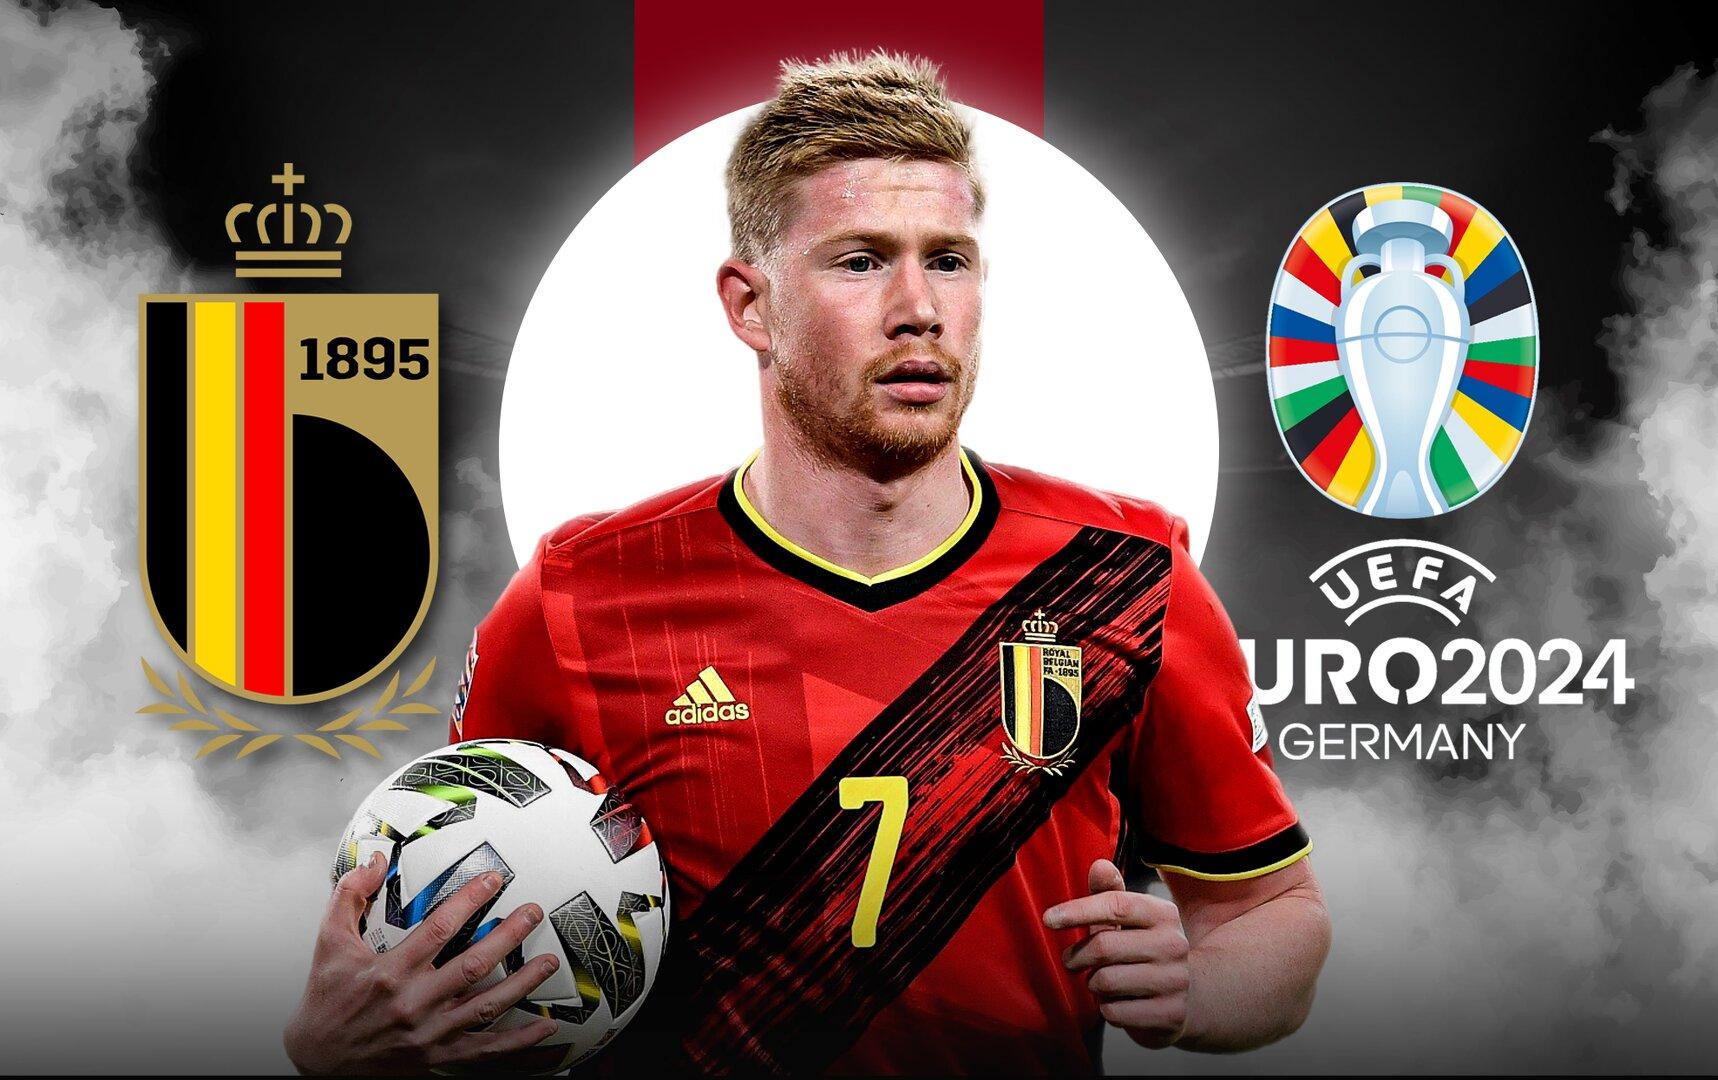 Belgium will play Ukraine in their last match of the Euro 2024